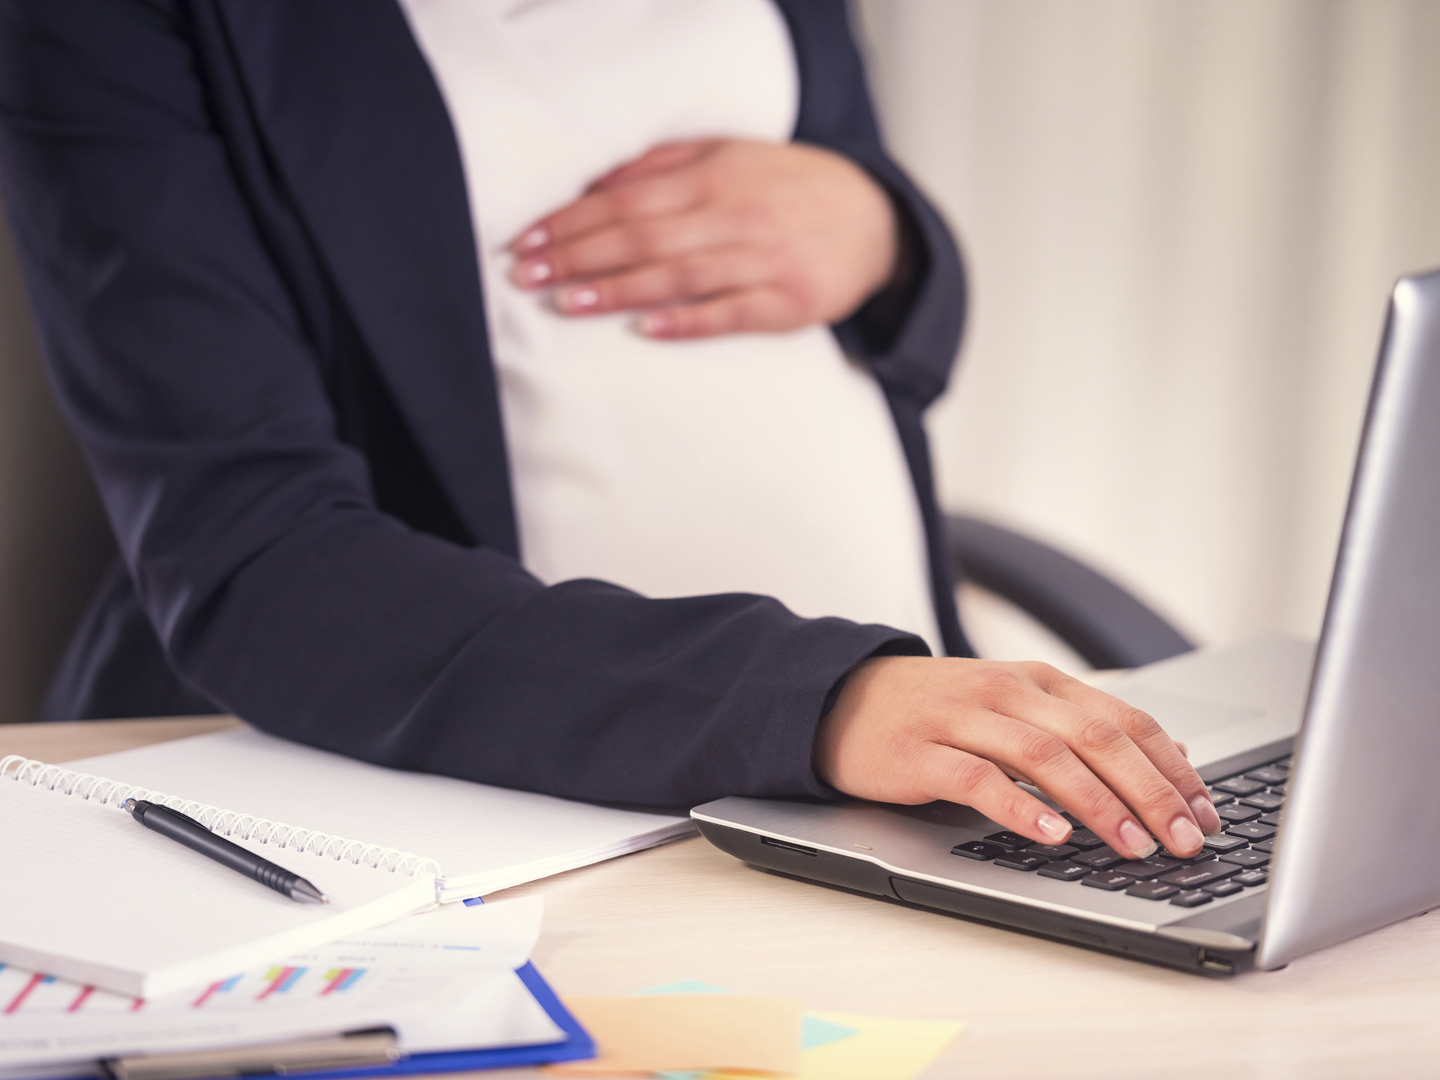 A pregnant woman hand on belly closeup uses laptop in the office